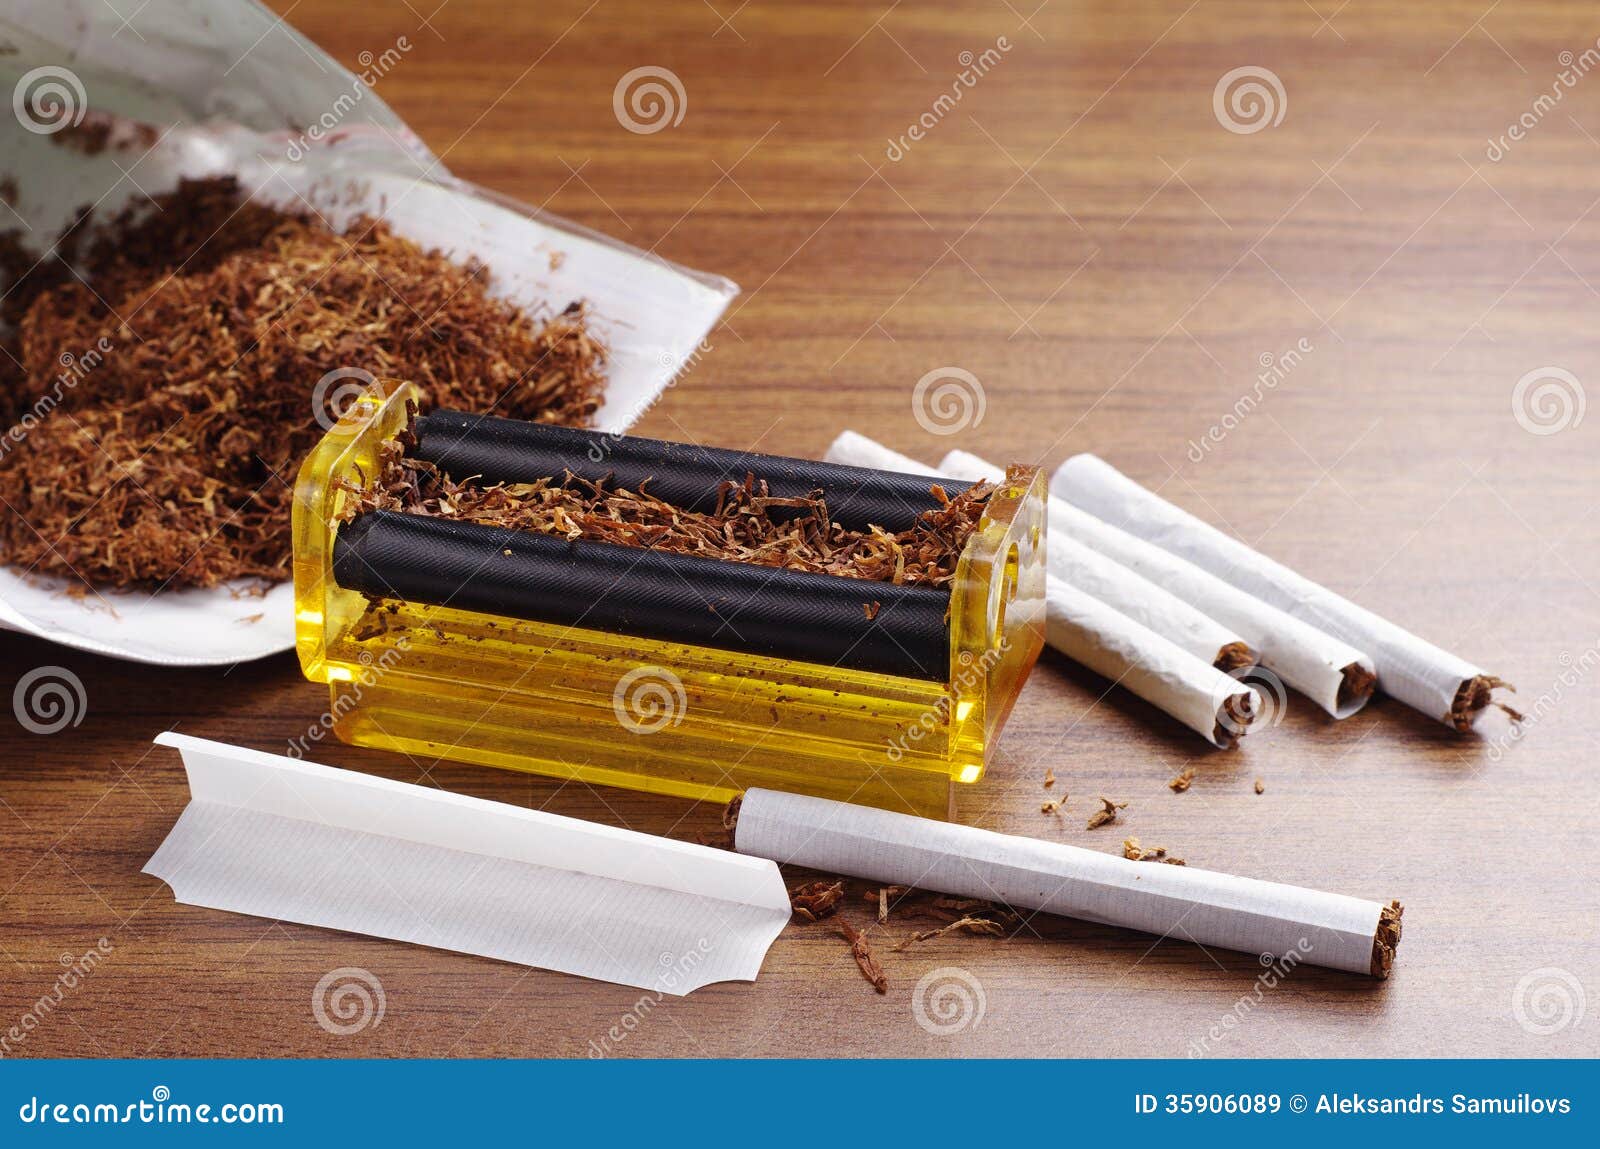 rolling-machine-cigarettes-brown-table-35906089.jpg